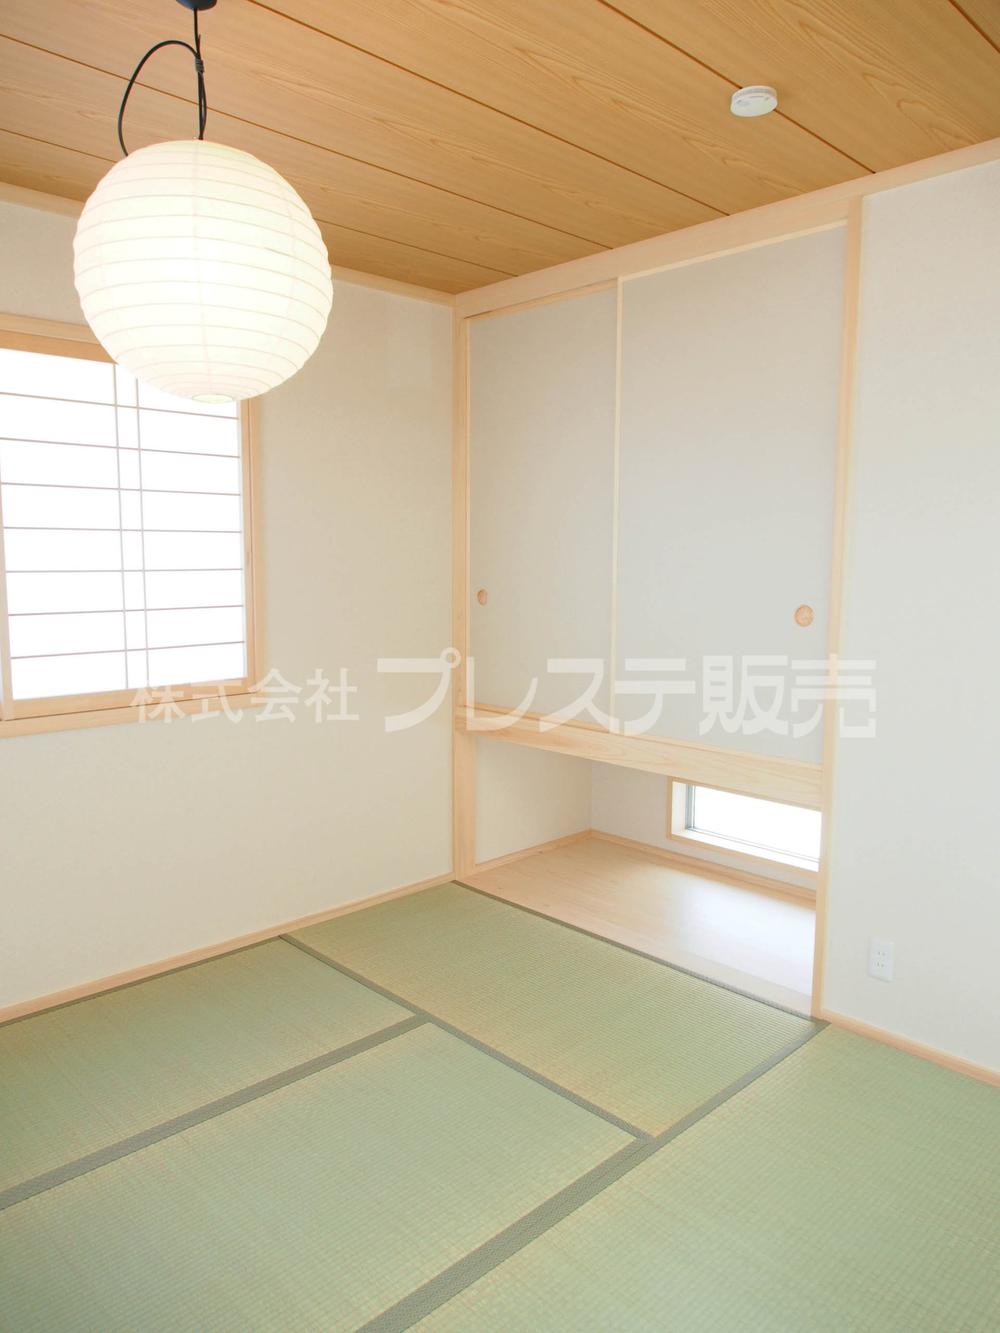 Non-living room. Local photo (No. 10 land Japanese-style room)